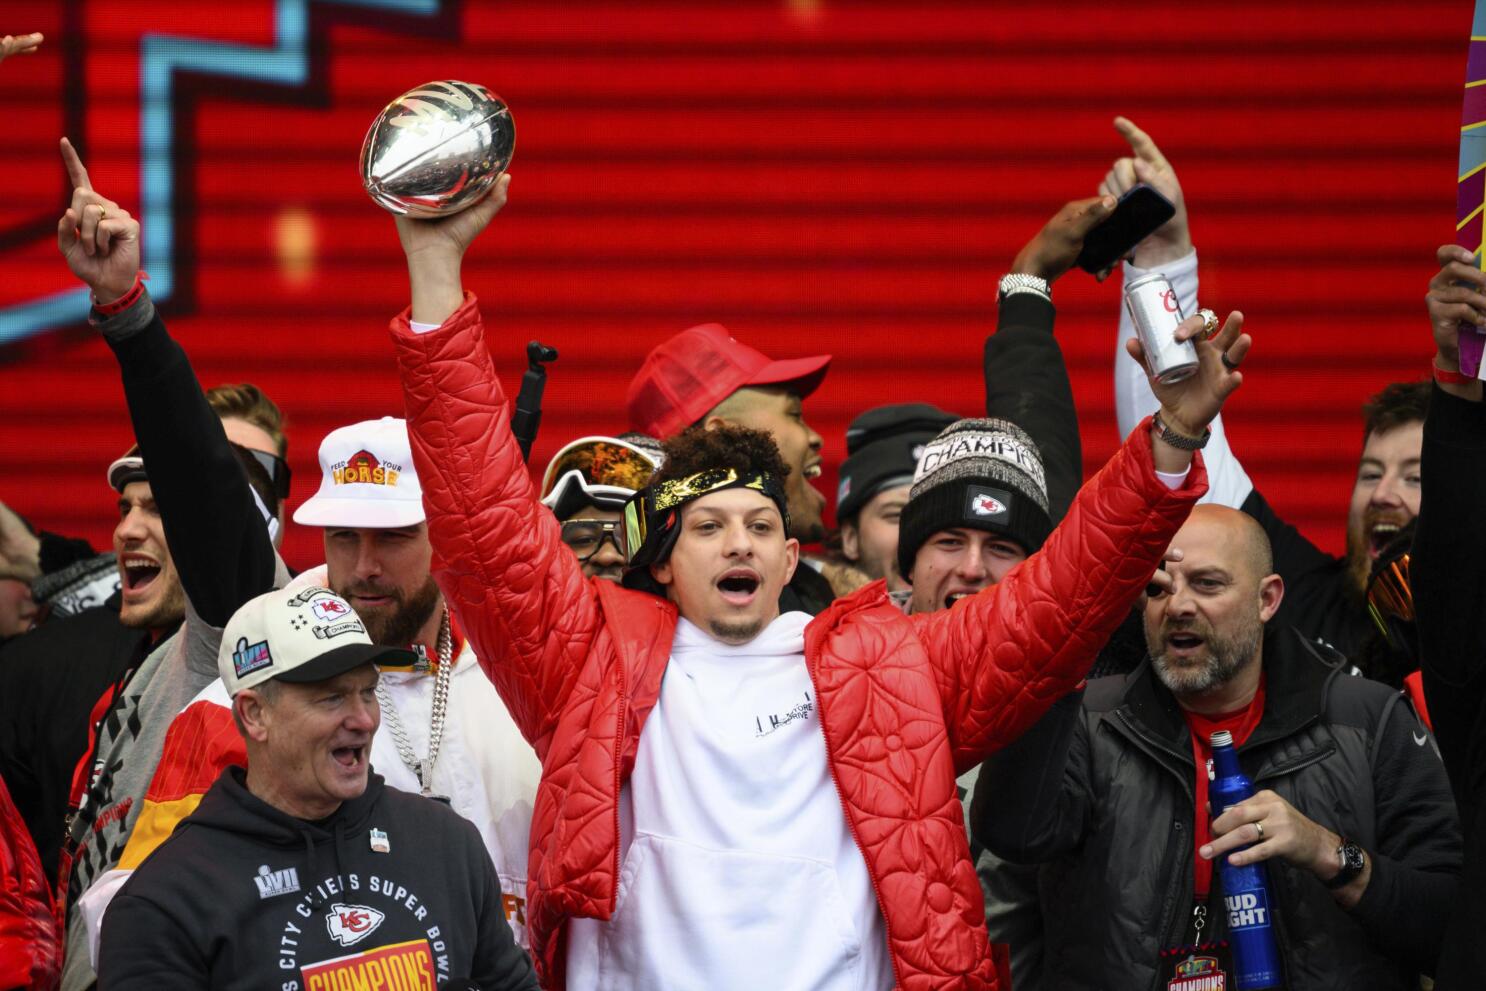 Chiefs Kingdom Champions Parade route finalized for Wednesday in KC